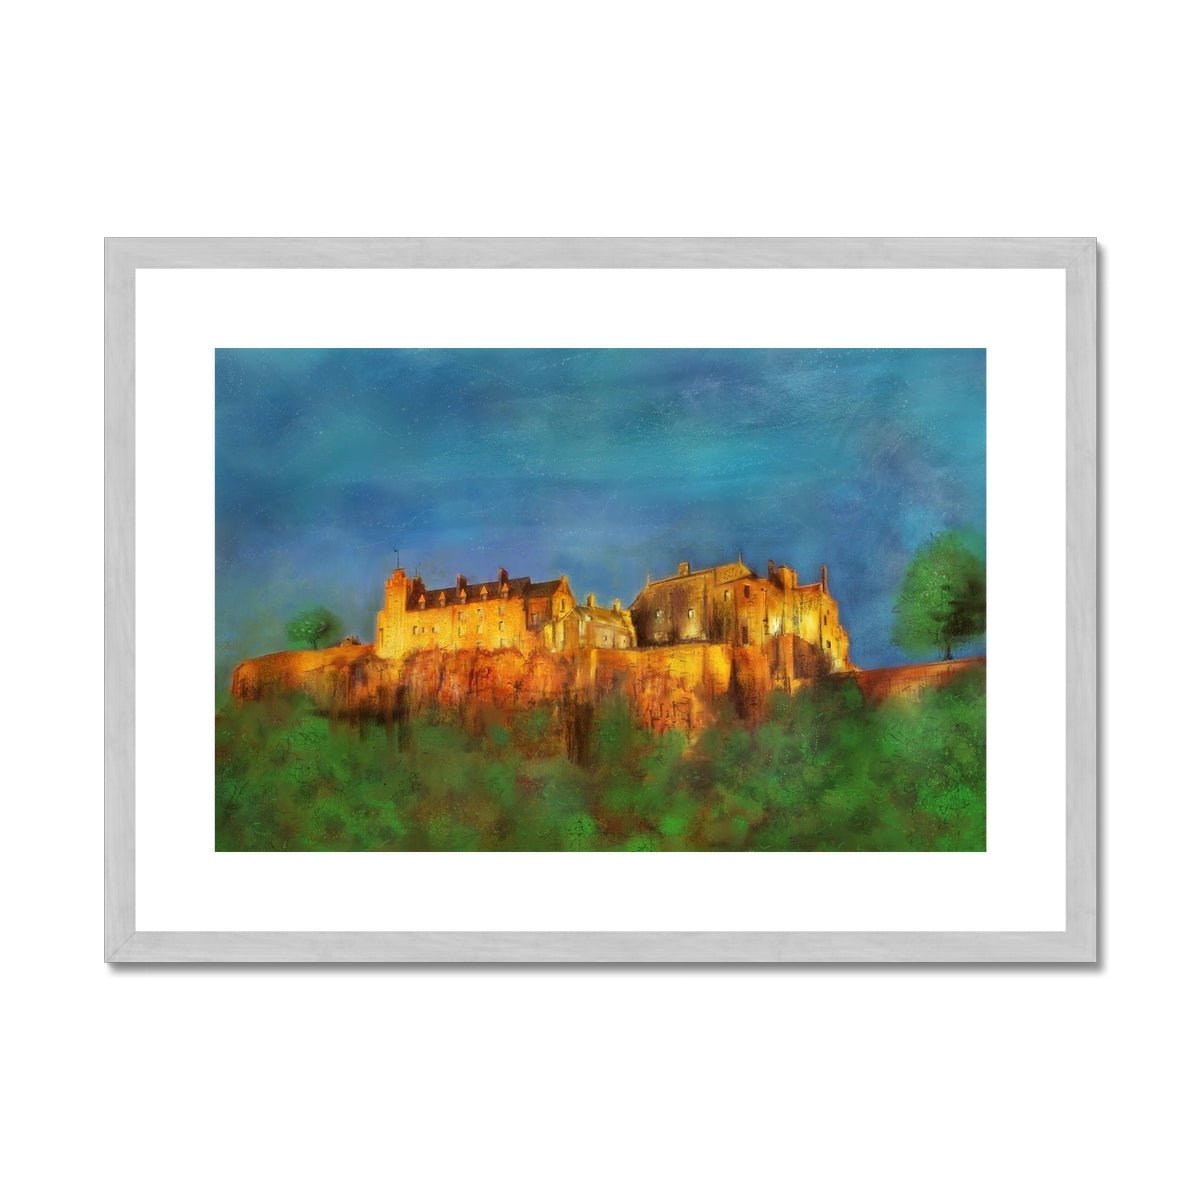 Stirling Castle Painting | Antique Framed & Mounted Prints From Scotland-Antique Framed & Mounted Prints-Historic & Iconic Scotland Art Gallery-A2 Landscape-Silver Frame-Paintings, Prints, Homeware, Art Gifts From Scotland By Scottish Artist Kevin Hunter